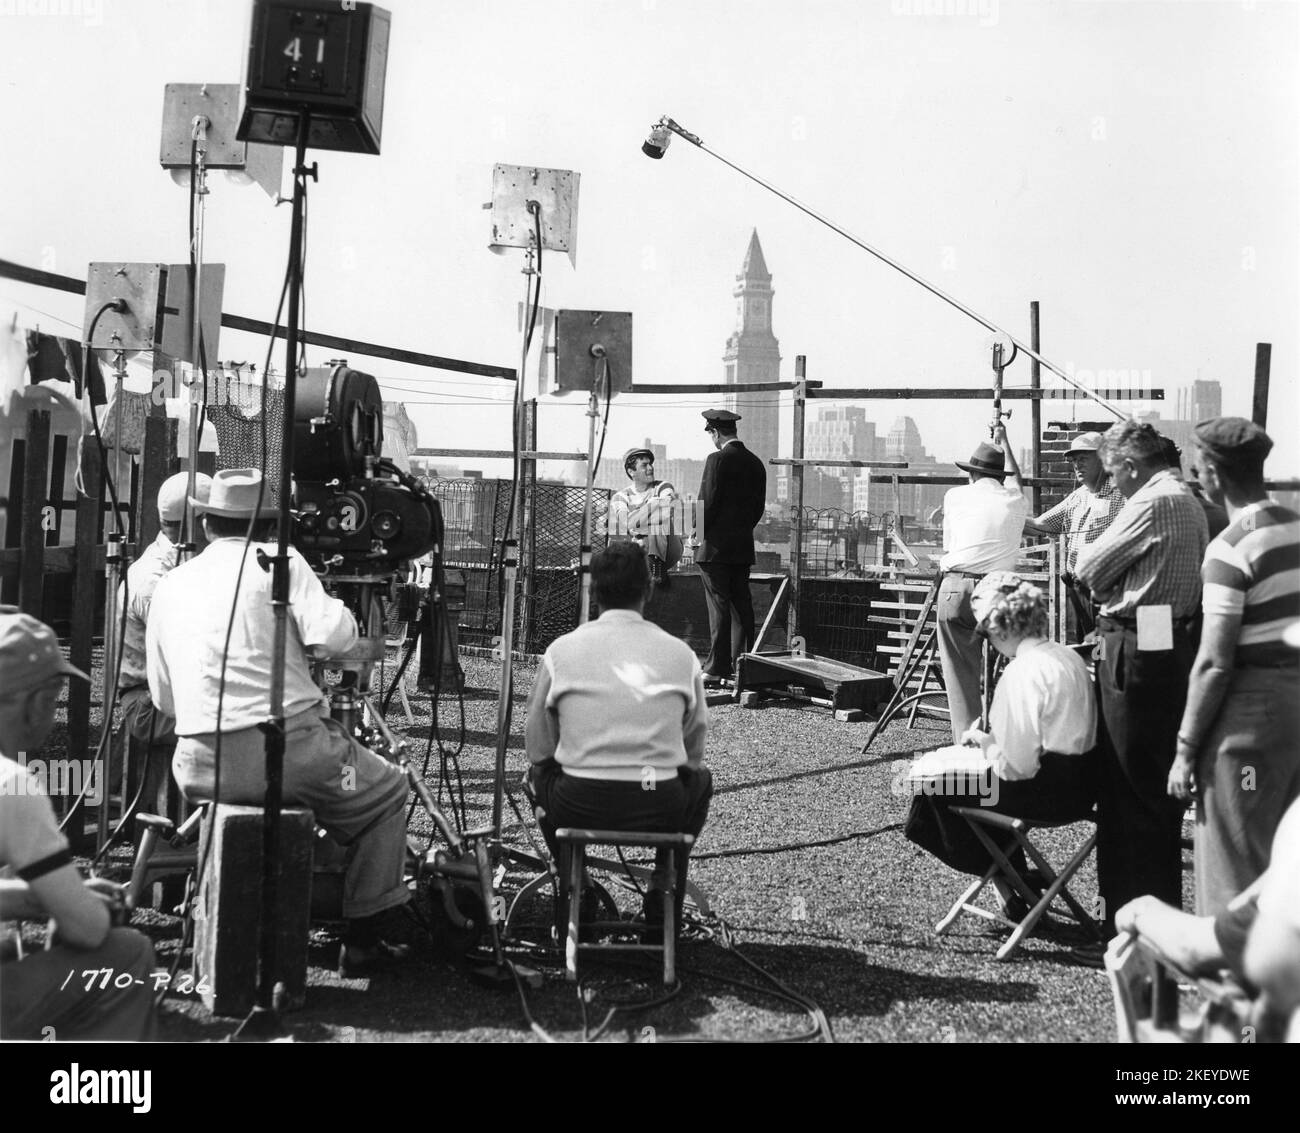 TONY CURTIS and GEORGE NADER on set location candid in Boston with Movie / Camera Crew during filming of SIX BRIDGES TO CROSS 1955 director JOSEPH PEVNEY cinematographer William H. Daniels producer Aaron Rosenberg Universal International Pictures (UI) Stock Photo